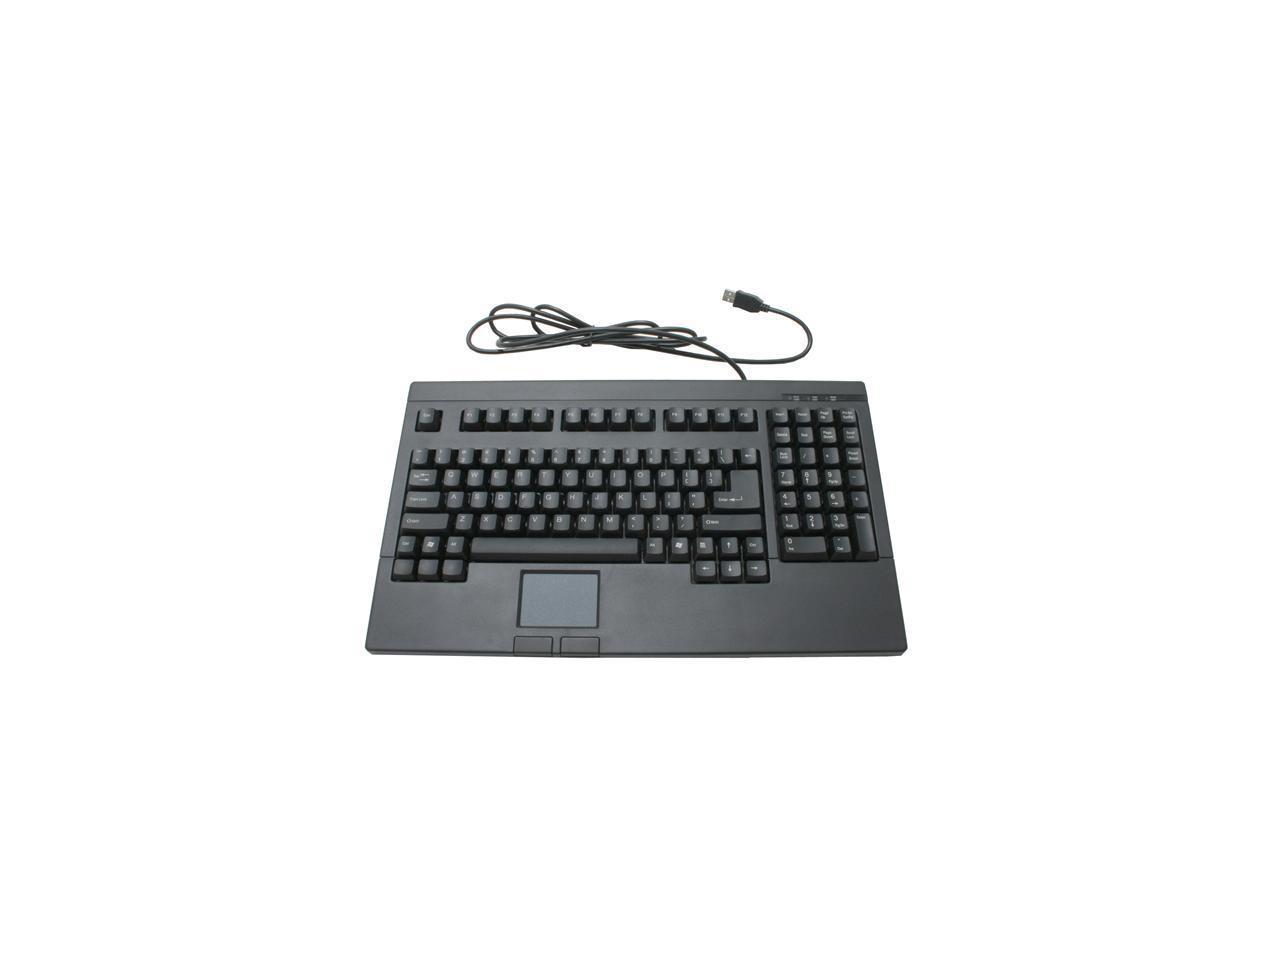 Adesso ACK-730UB EasyTouch USB Rackmount Size Keyboard with touchpad (Black)